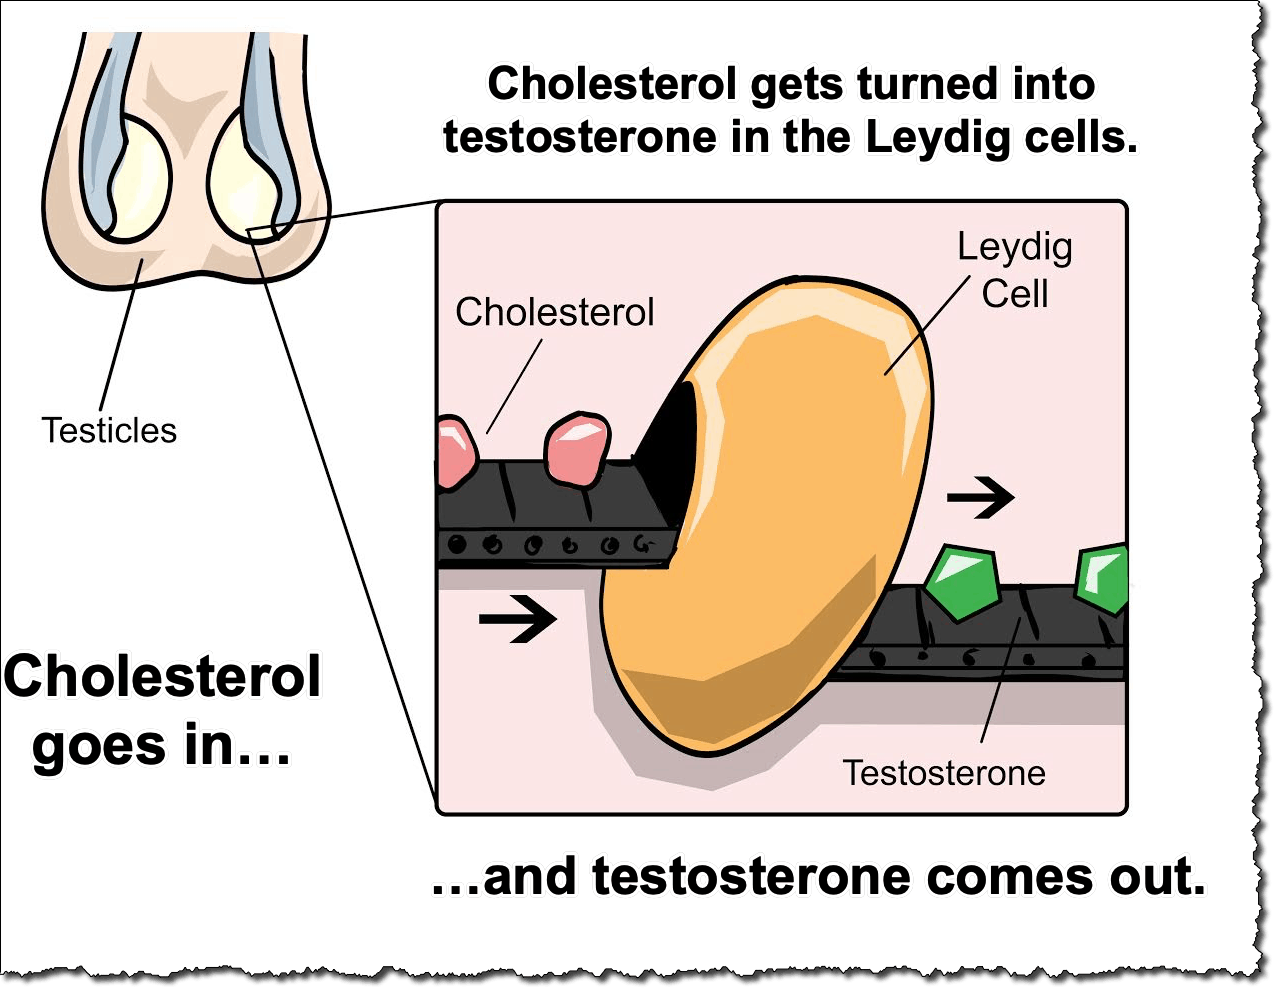 Cholestrol gets turned into testosterone in the Leygid cells. Cholestrol goes in... ...and testosterone comes out.